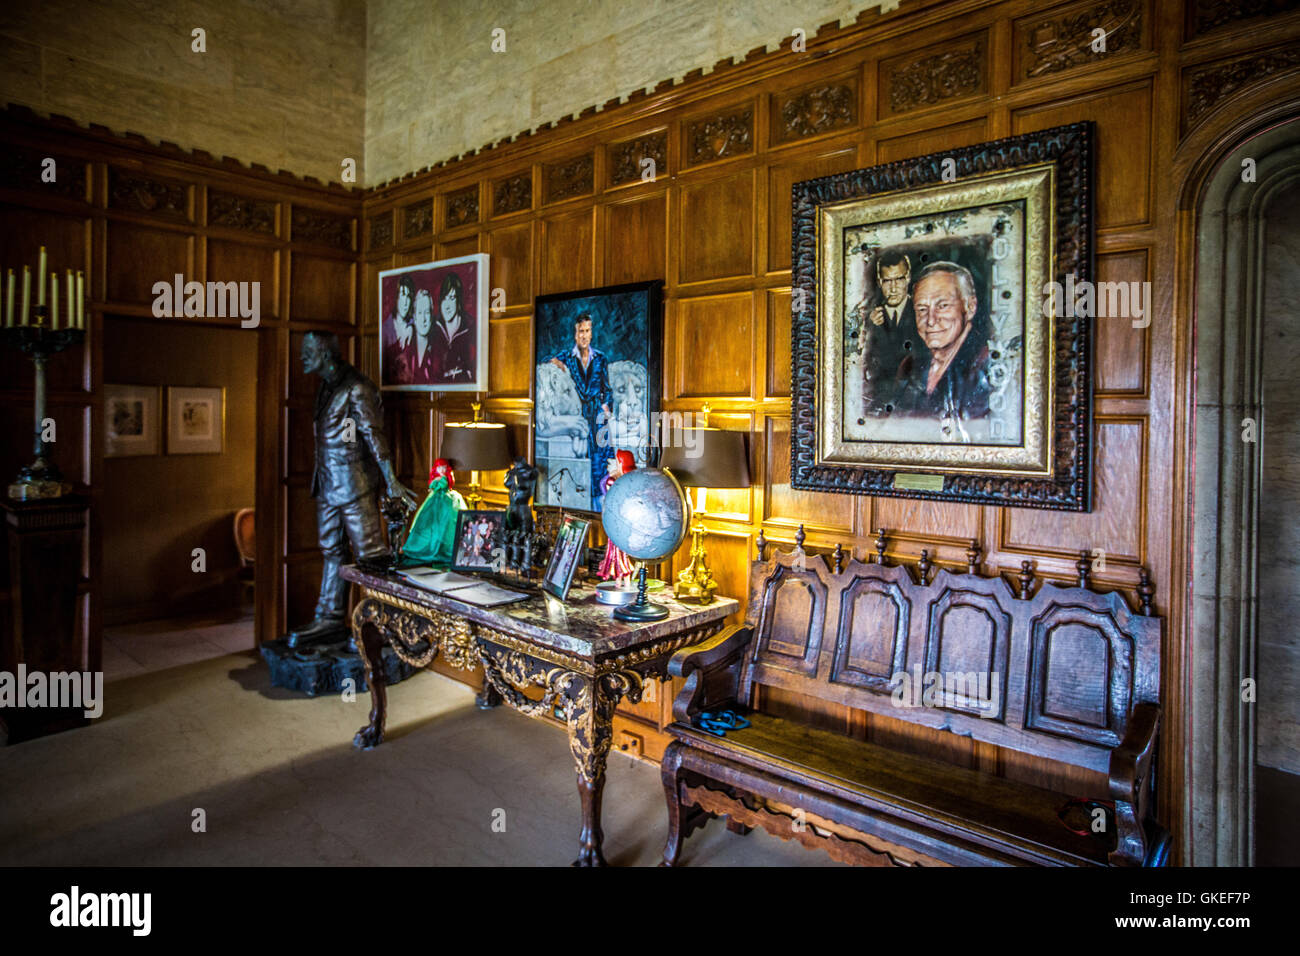 The Playboy Mansion Is The Home Of Playboy Magazine Founder